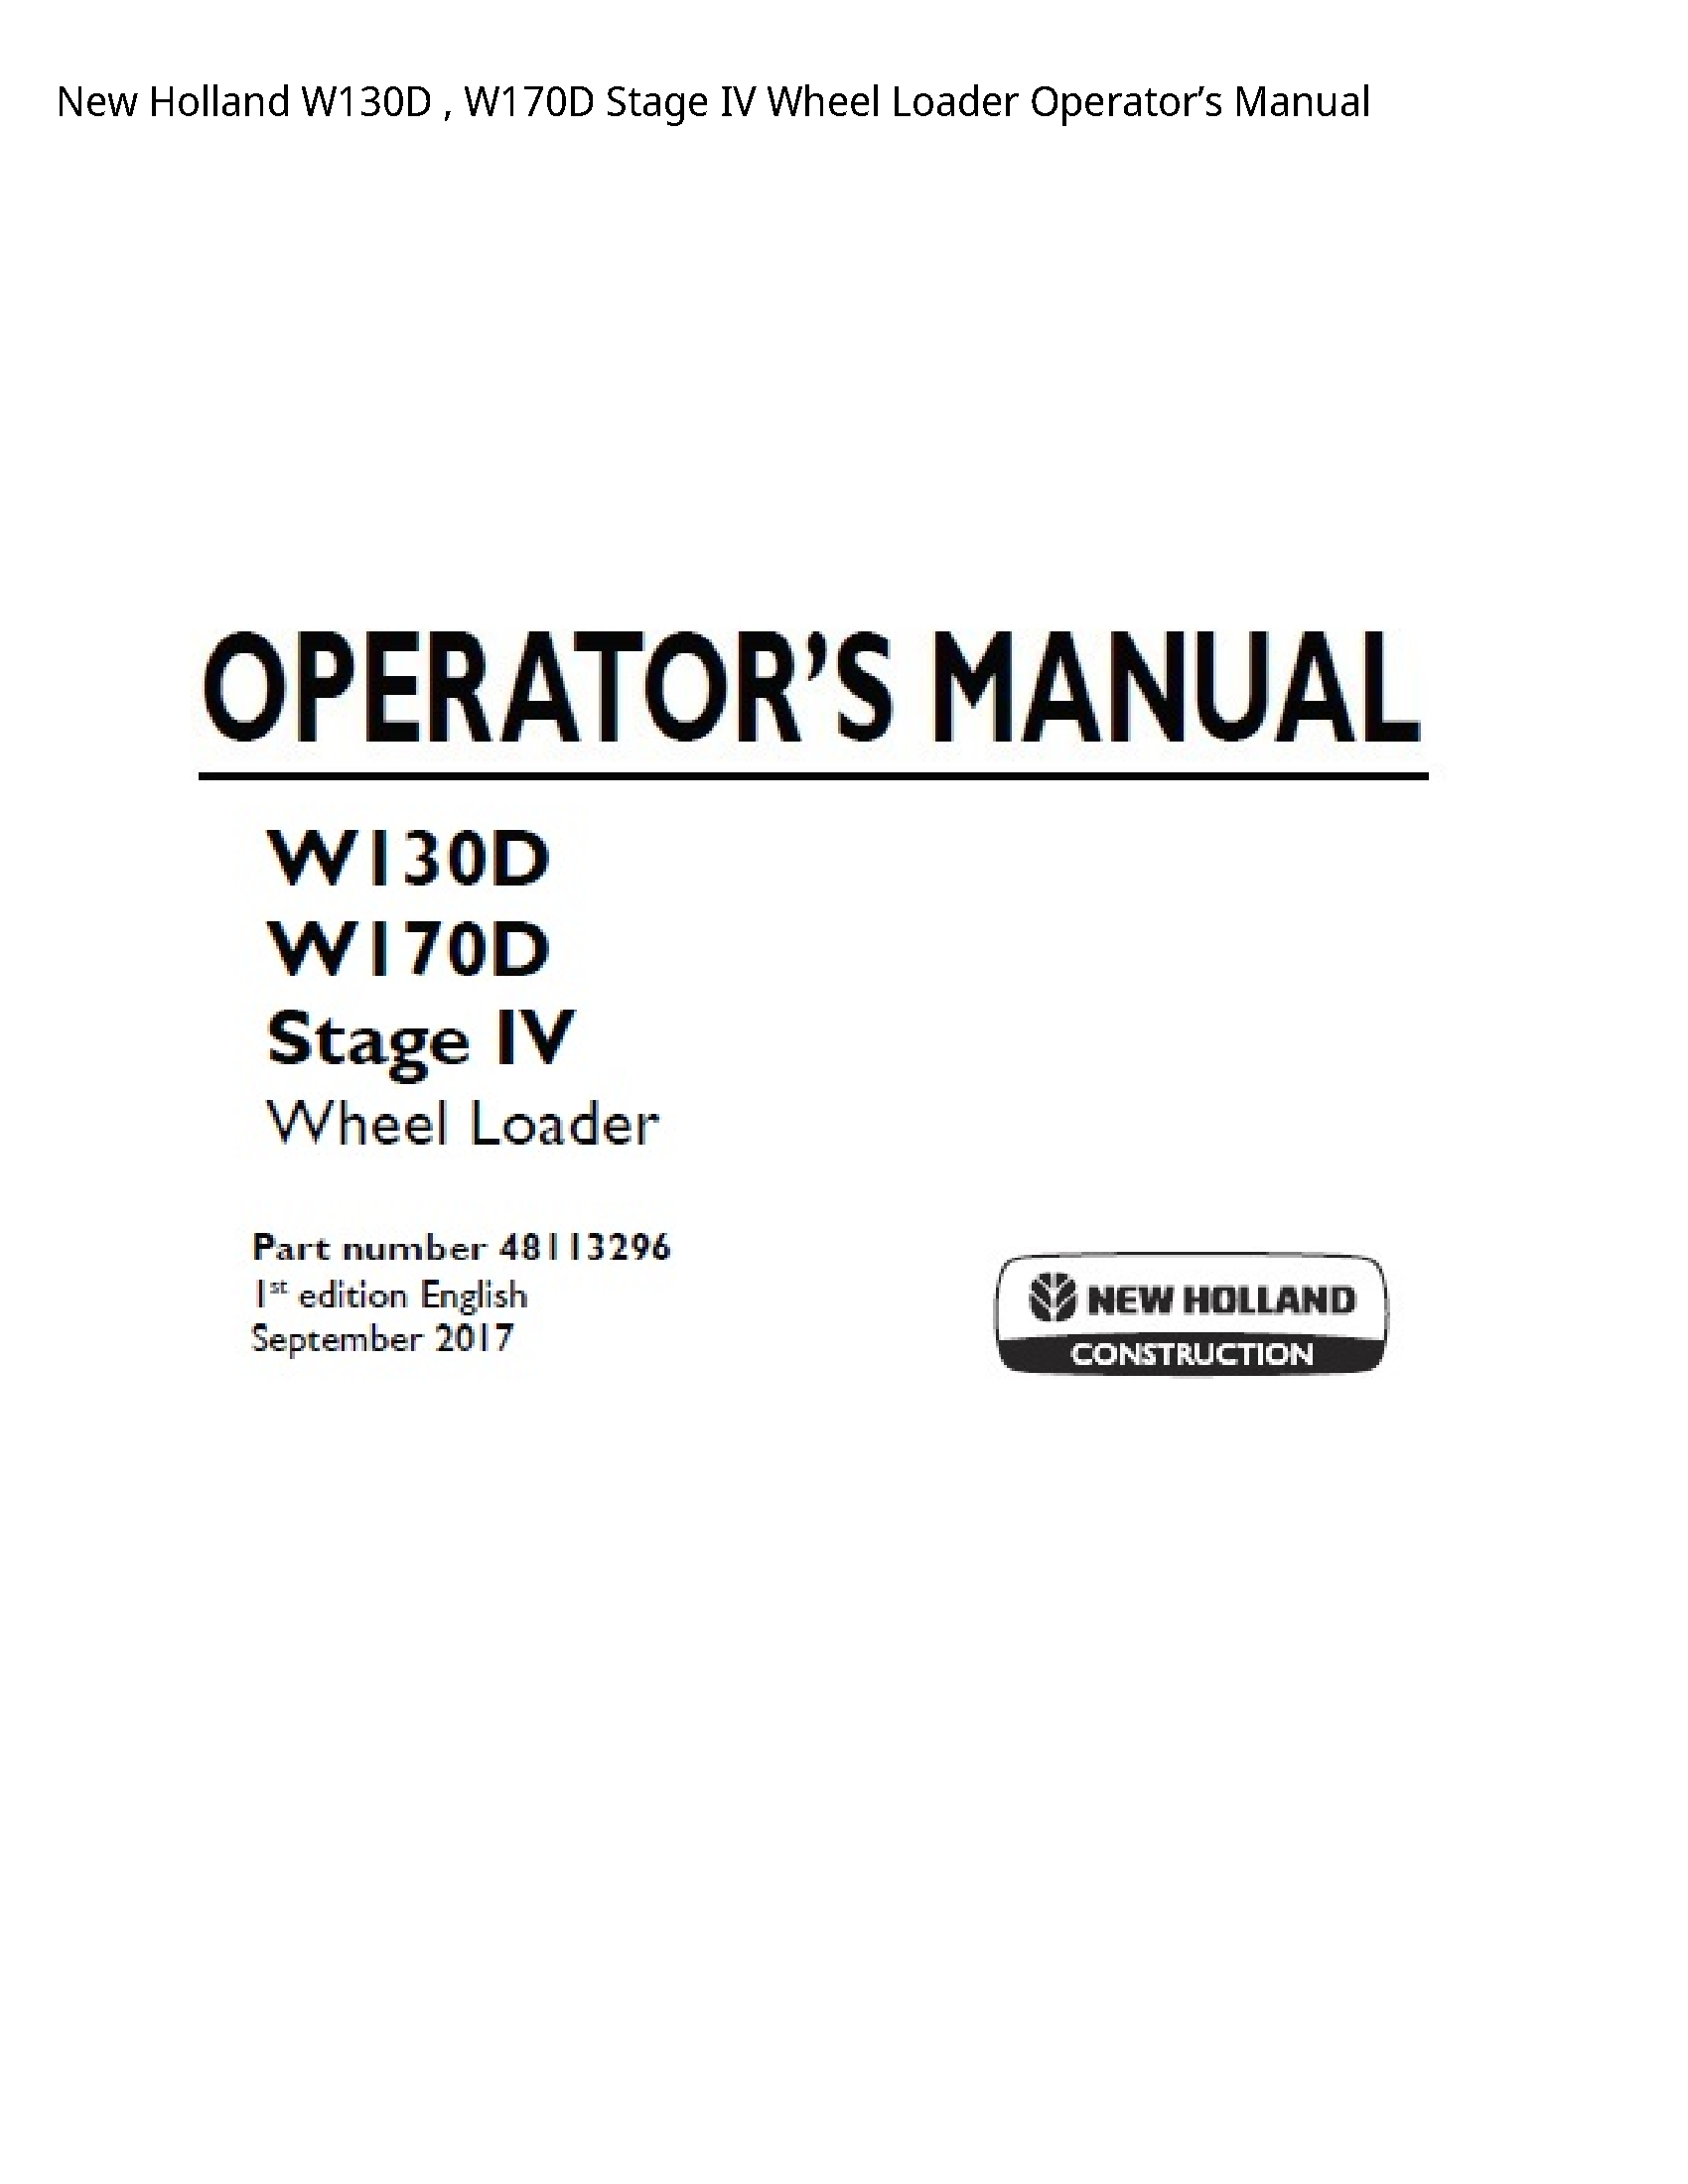 New Holland W130D Stage IV Wheel Loader Operator’s manual